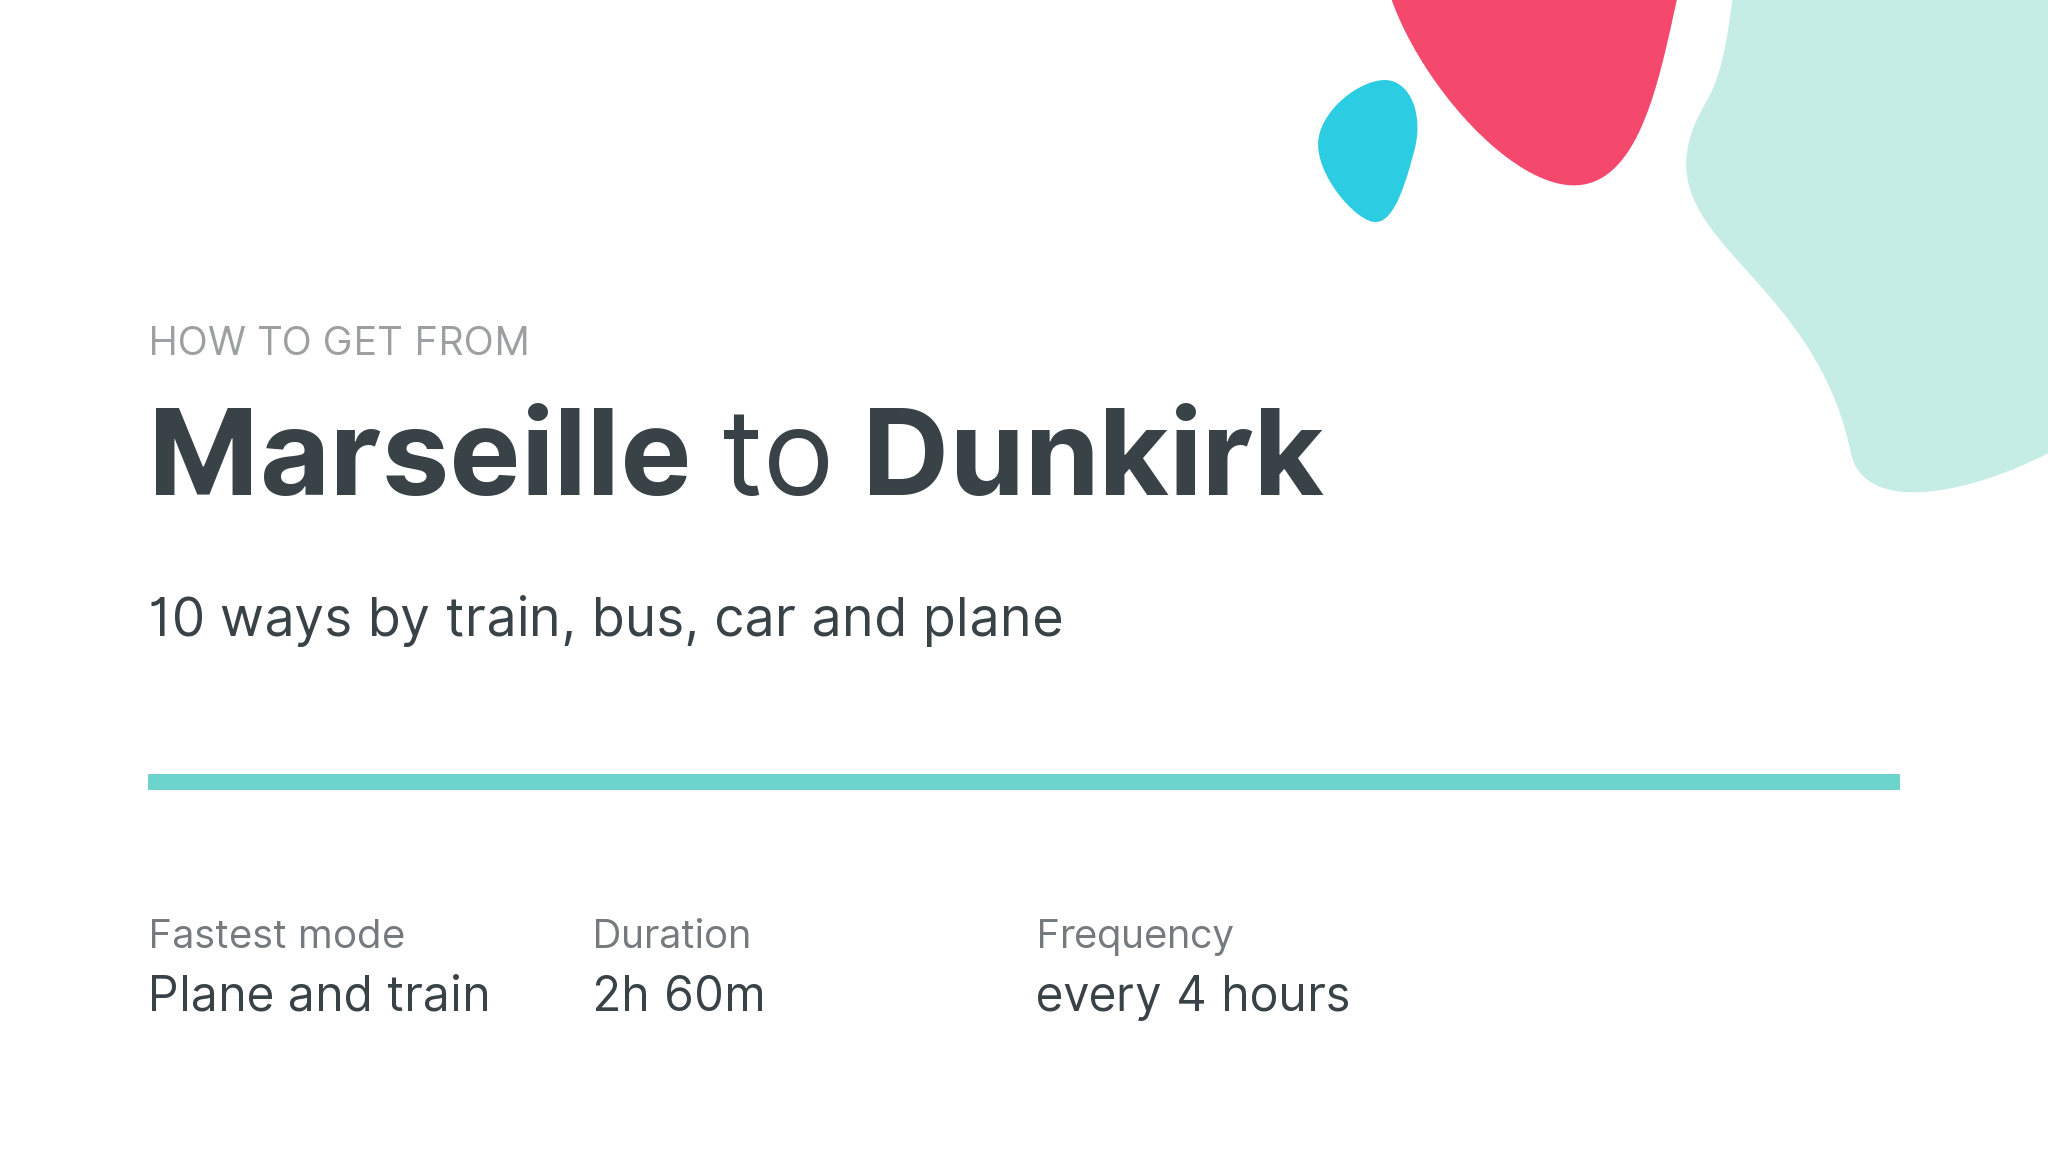 How do I get from Marseille to Dunkirk